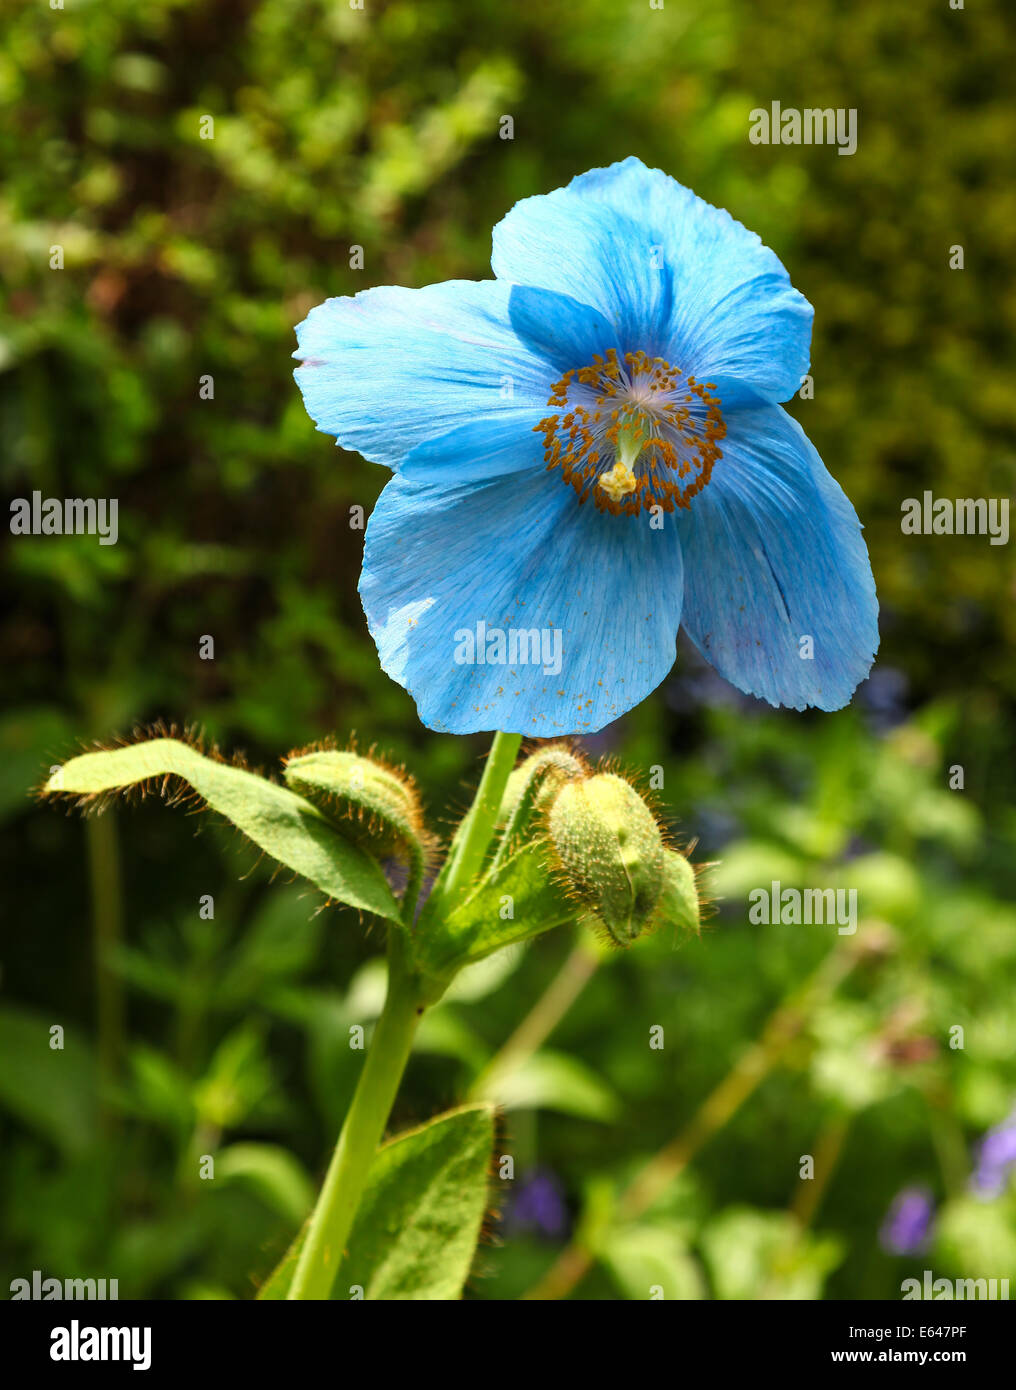 Meconopsis grandis, known as the blue poppy flower or Himalayan blue poppy, England, UK Stock Photo